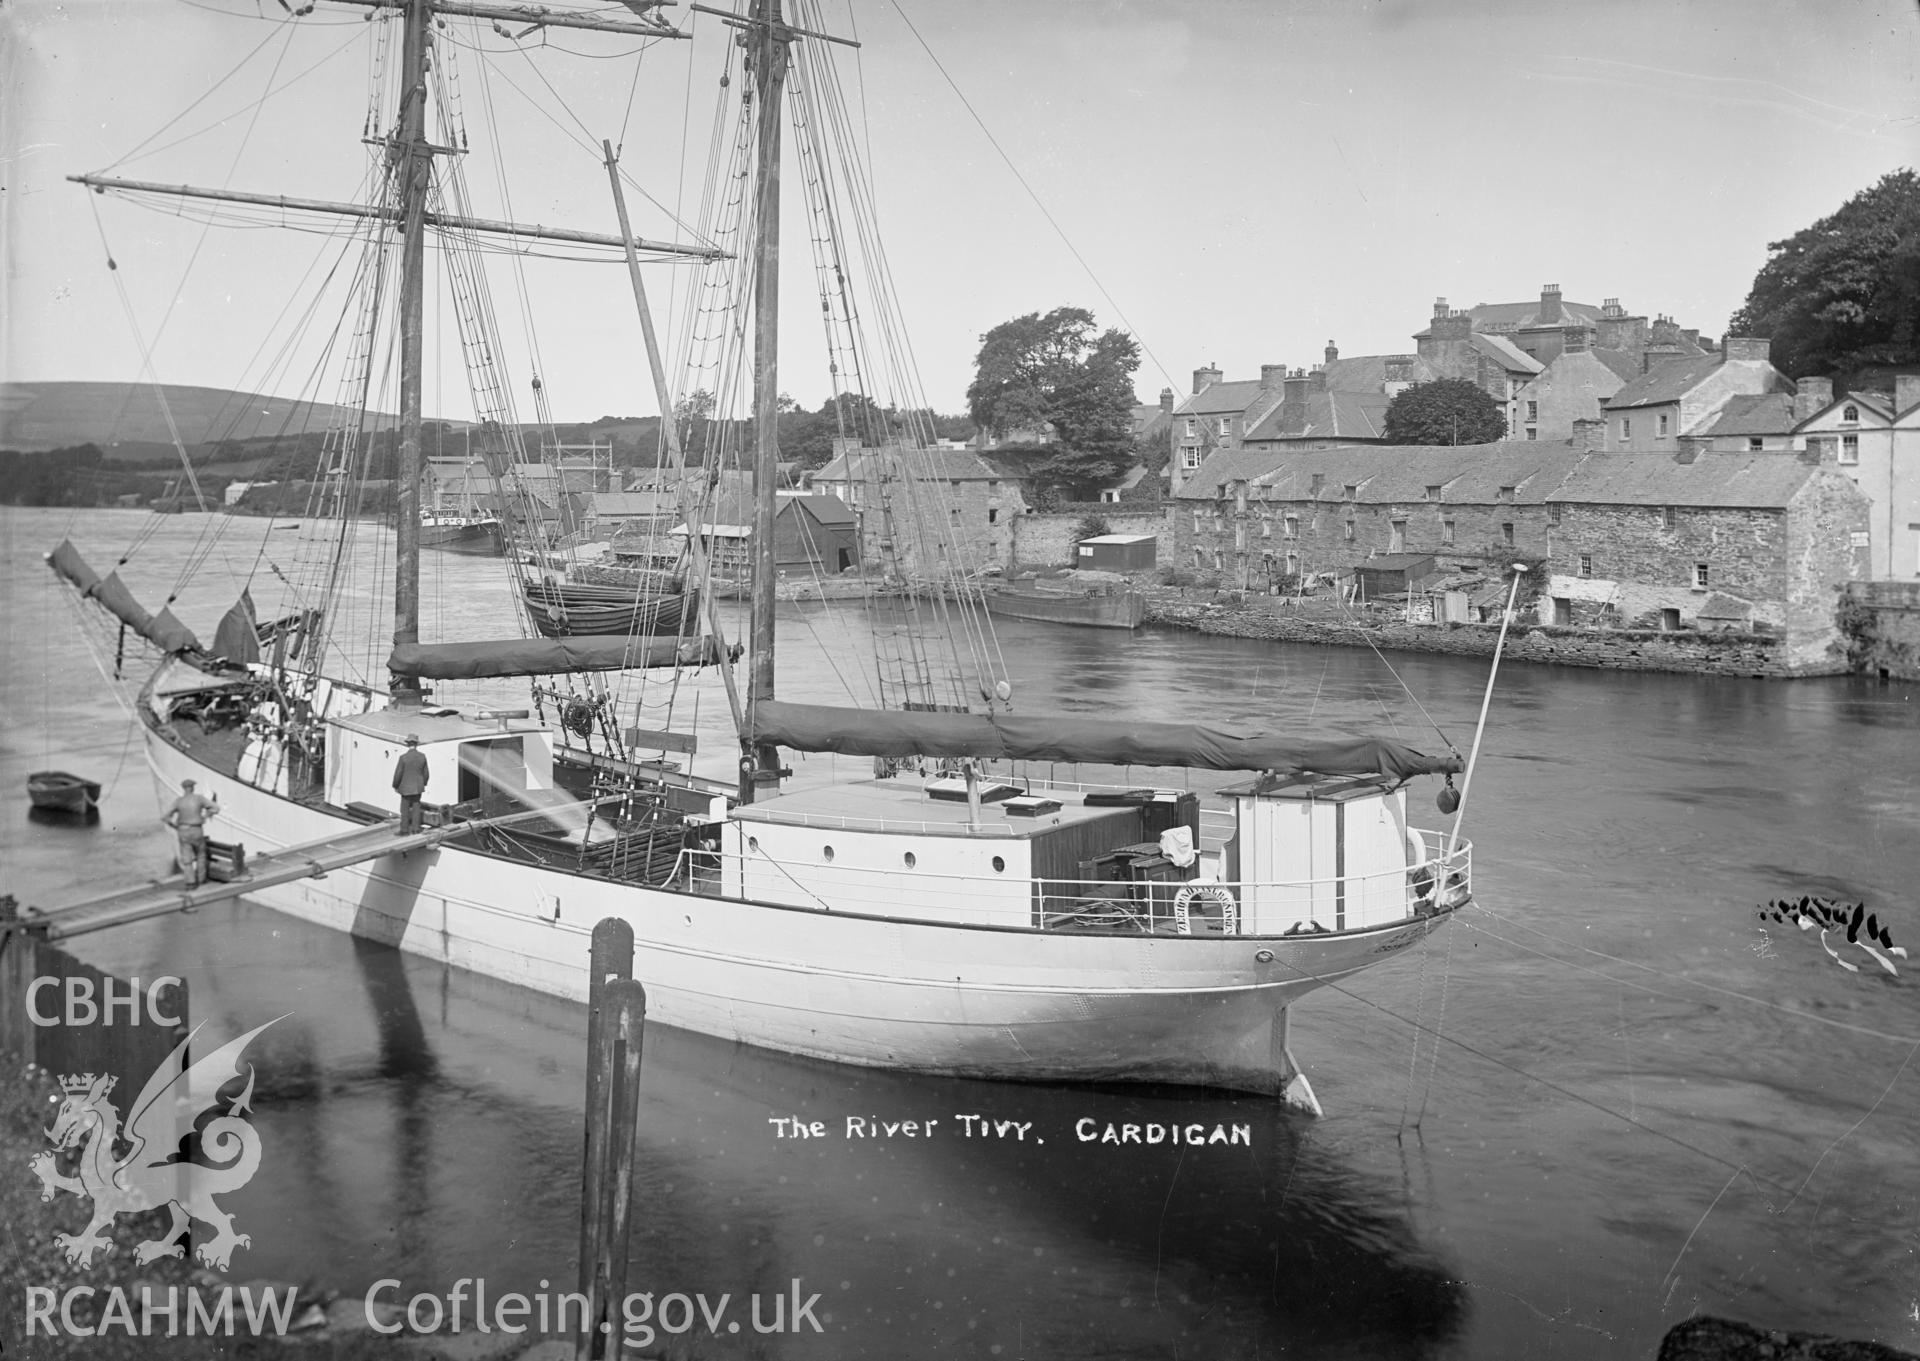 Black and white glass negative showing view of masted boat on the River Tivy, Cardigan.